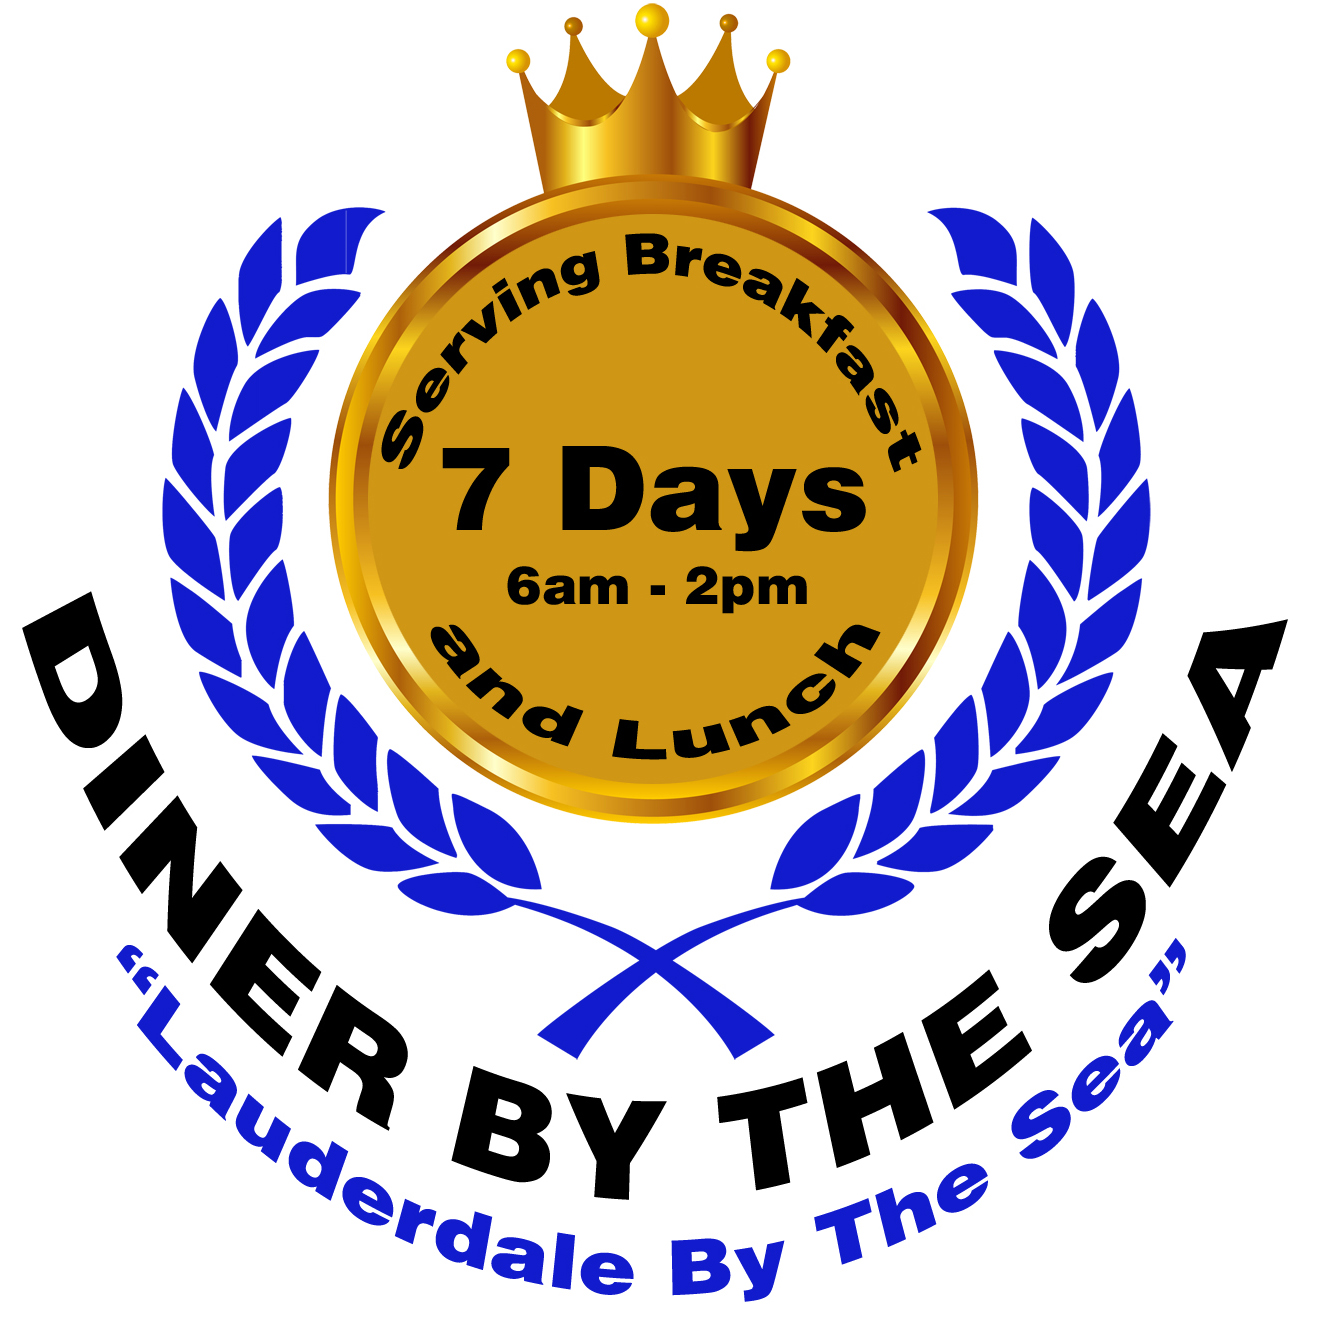 Diner By-the-Sea logo